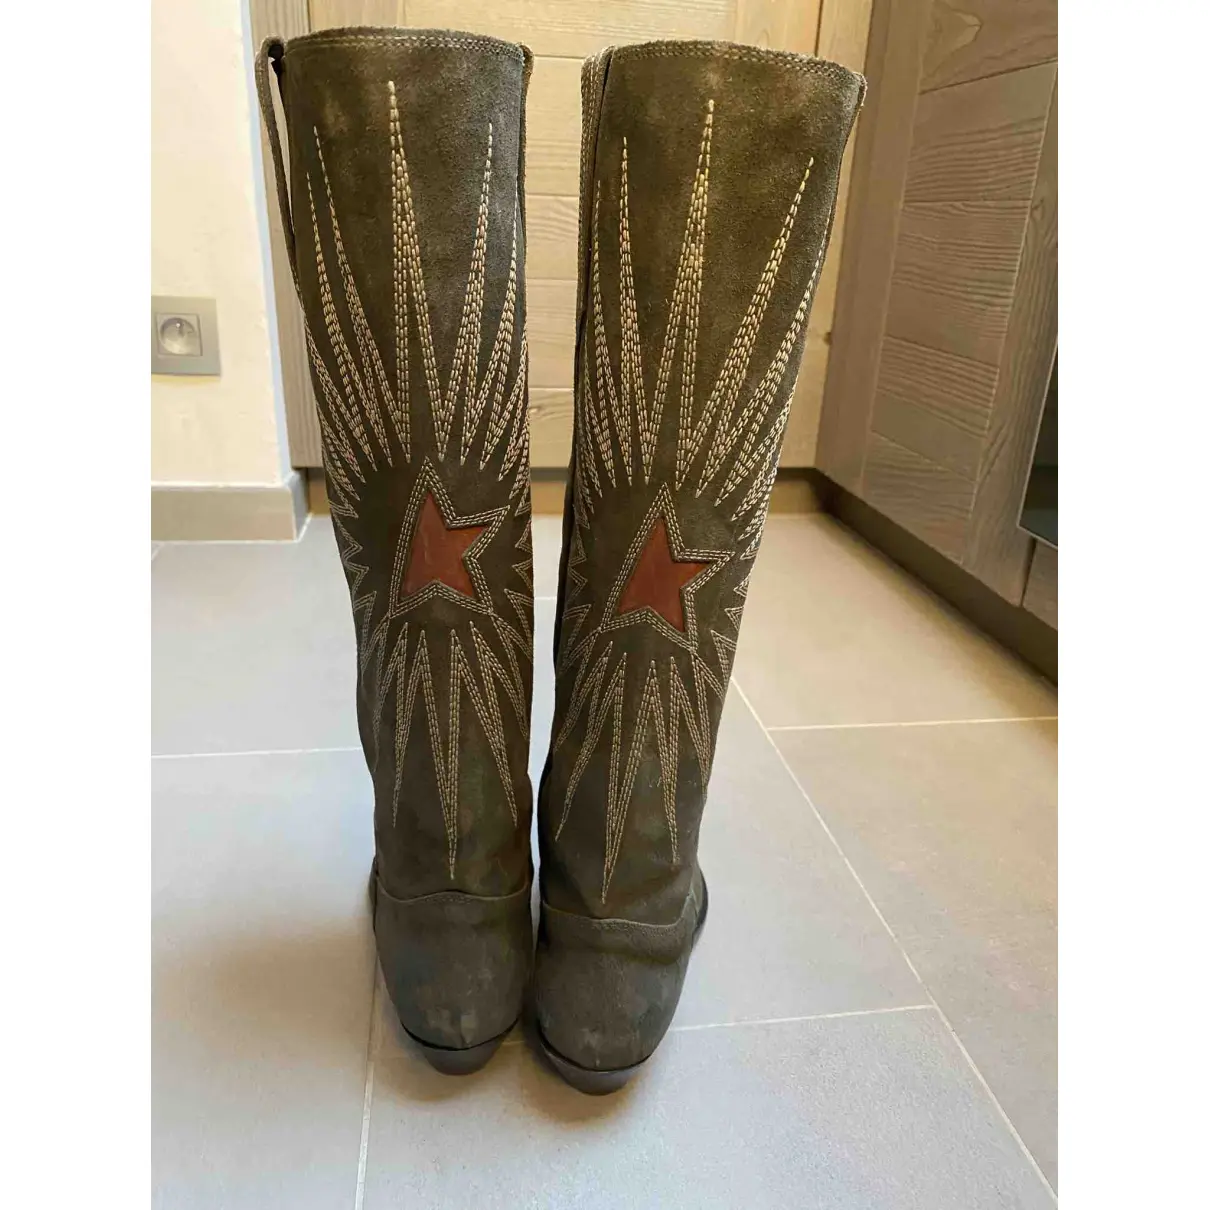 Buy Golden Goose Wish Star leather cowboy boots online